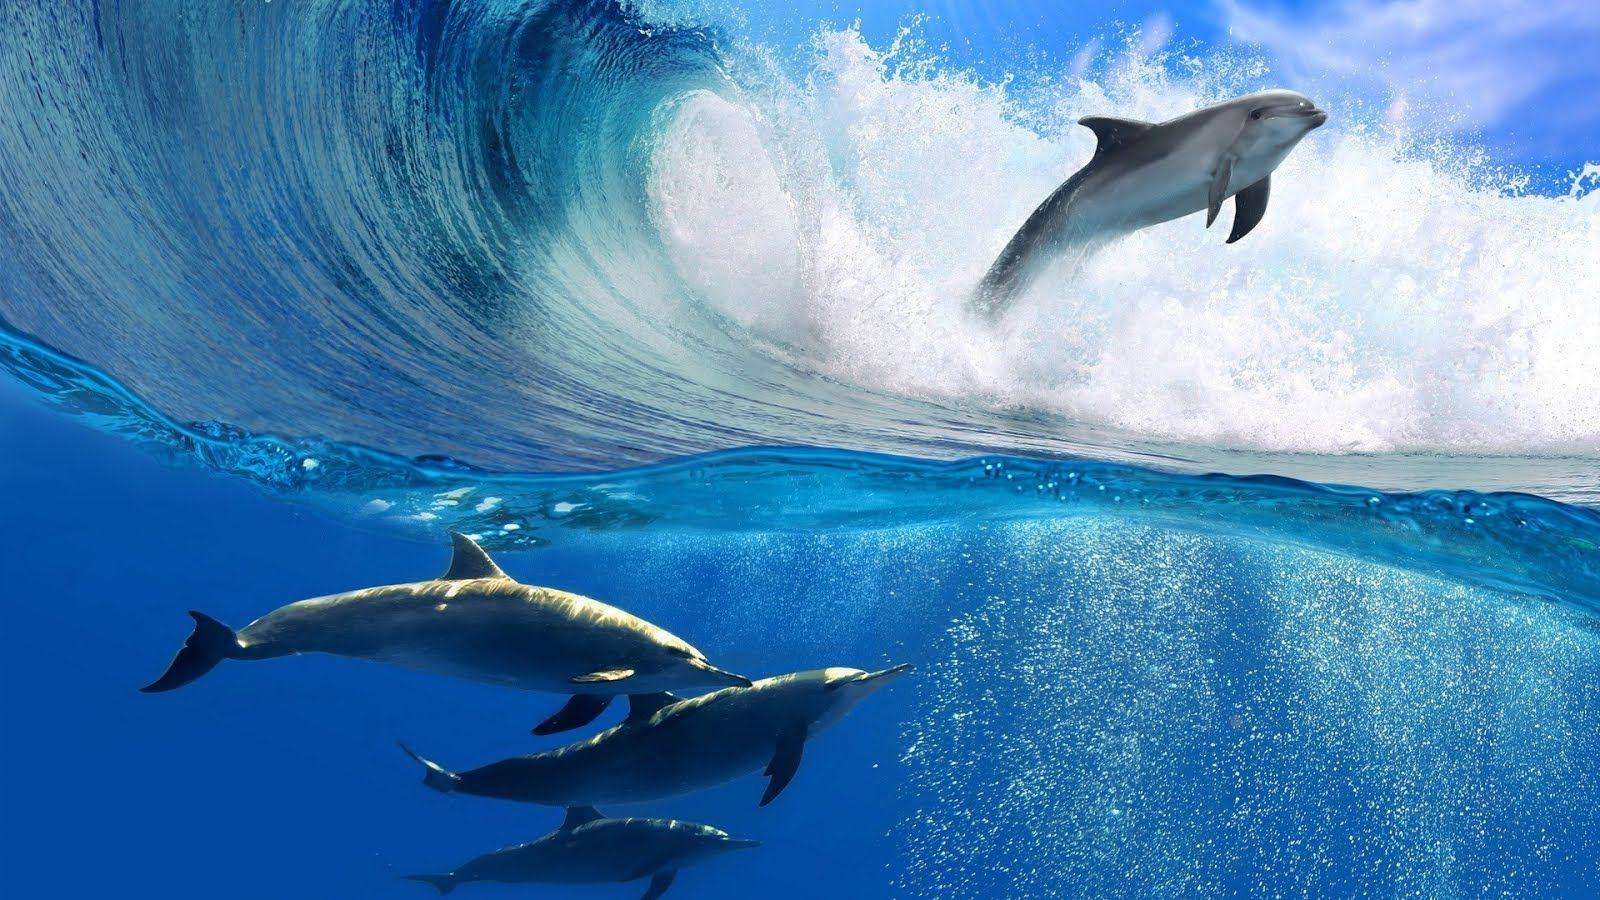 Underwater sea creatures and other animals Wallpaper. SEA LIFE